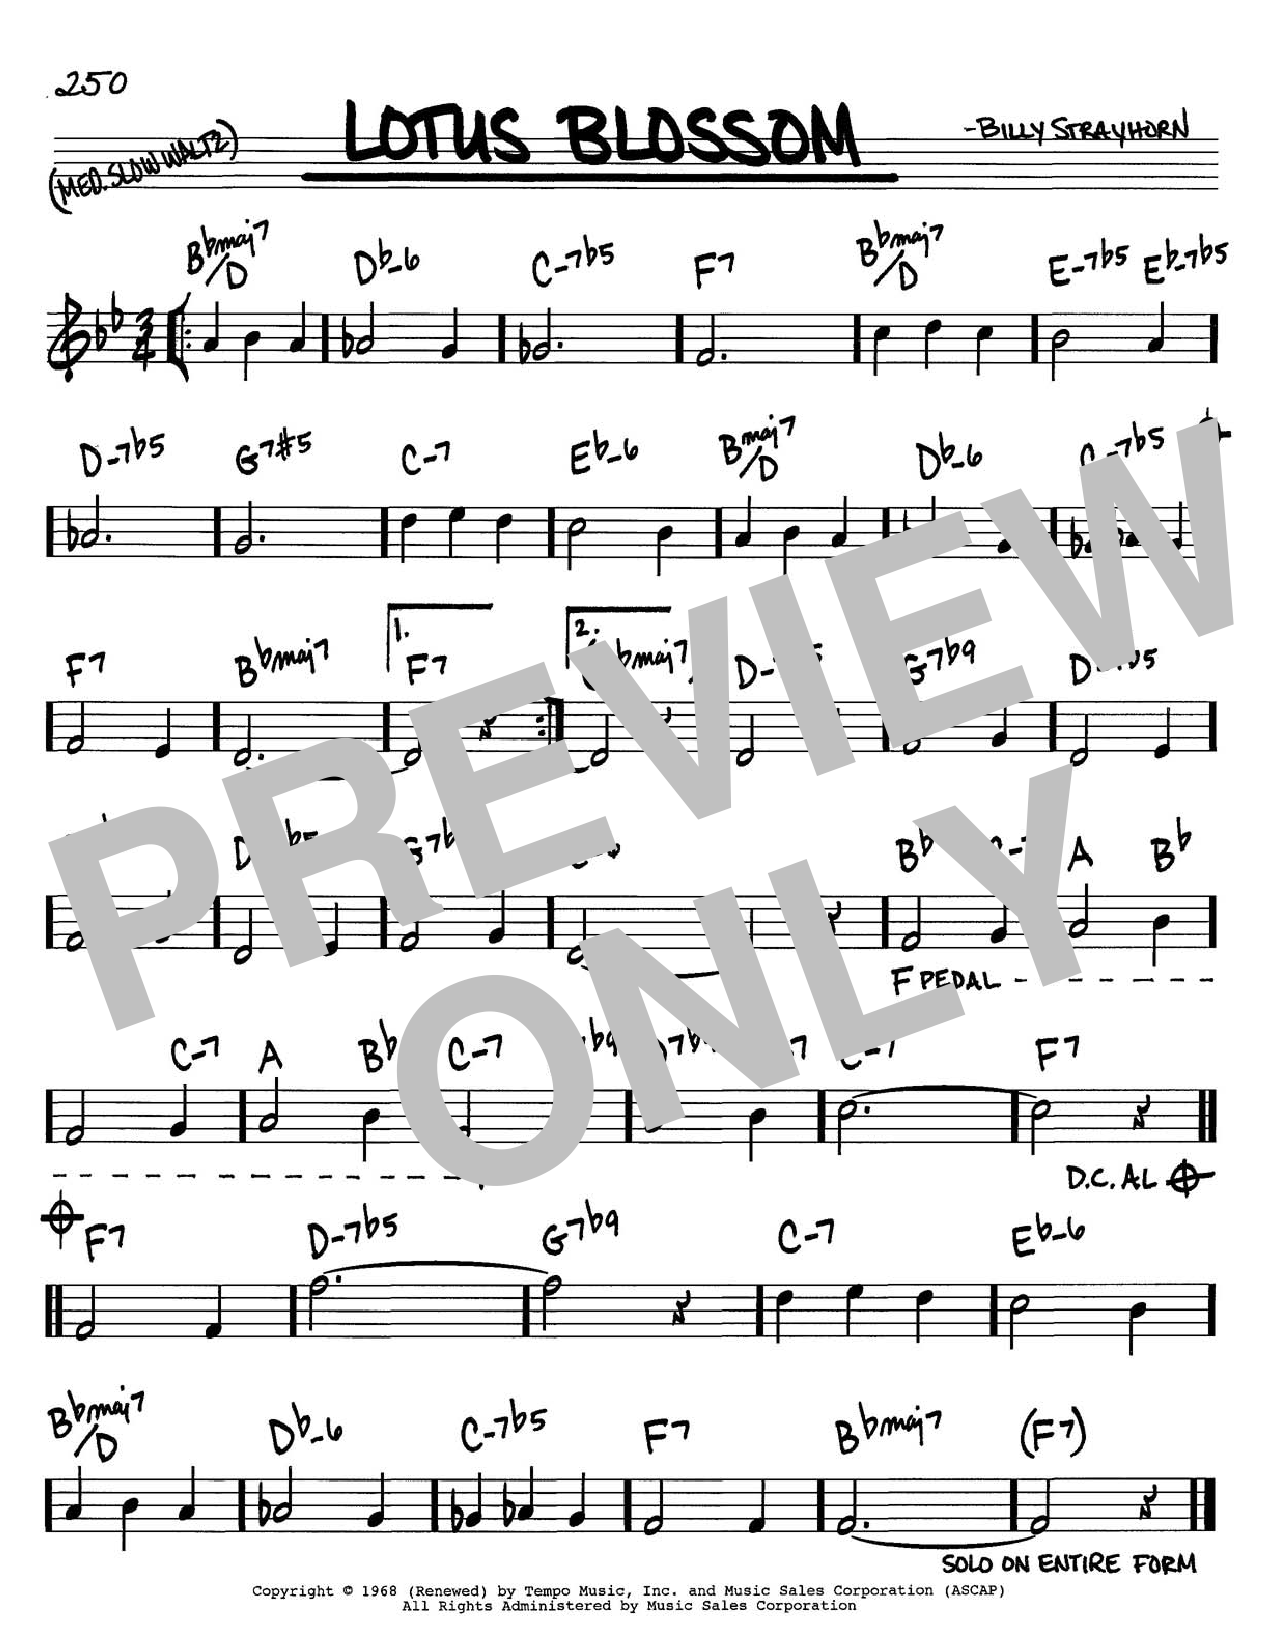 Billy Strayhorn Lotus Blossom sheet music notes and chords. Download Printable PDF.